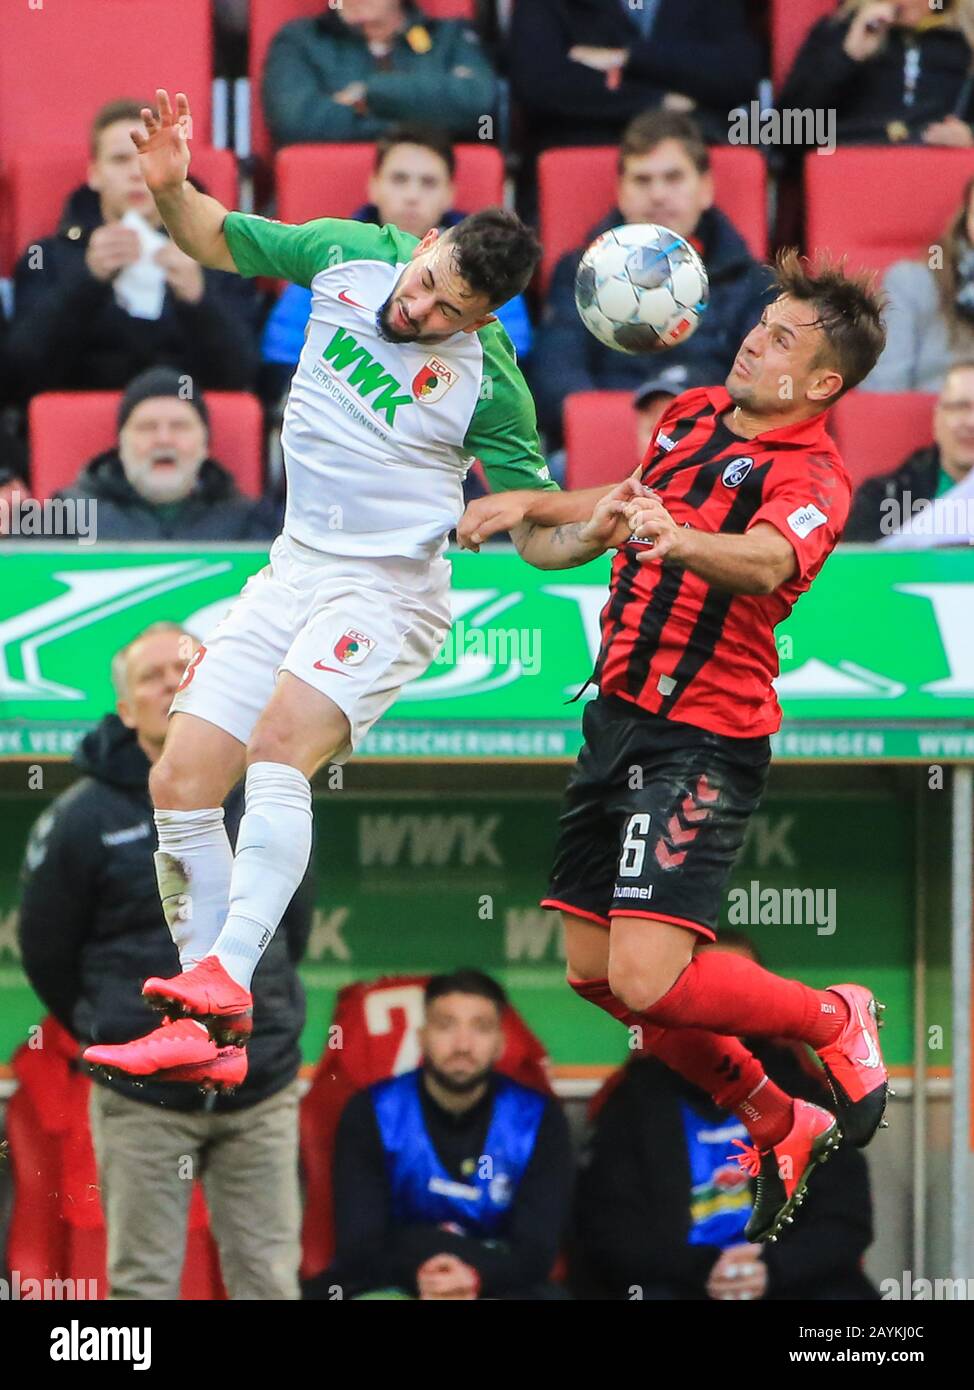 Augsburg, Germany. 15th Feb, 2020. Marco Richter (L) of Augsburg vies for header with Amir Abrashi of Freiburg during a German Bundesliga match between FC Augsburg and SC Freiburg in Augsburg, Germany, Feb. 15, 2020. Credit: Philippe Ruiz/Xinhua/Alamy Live News Stock Photo